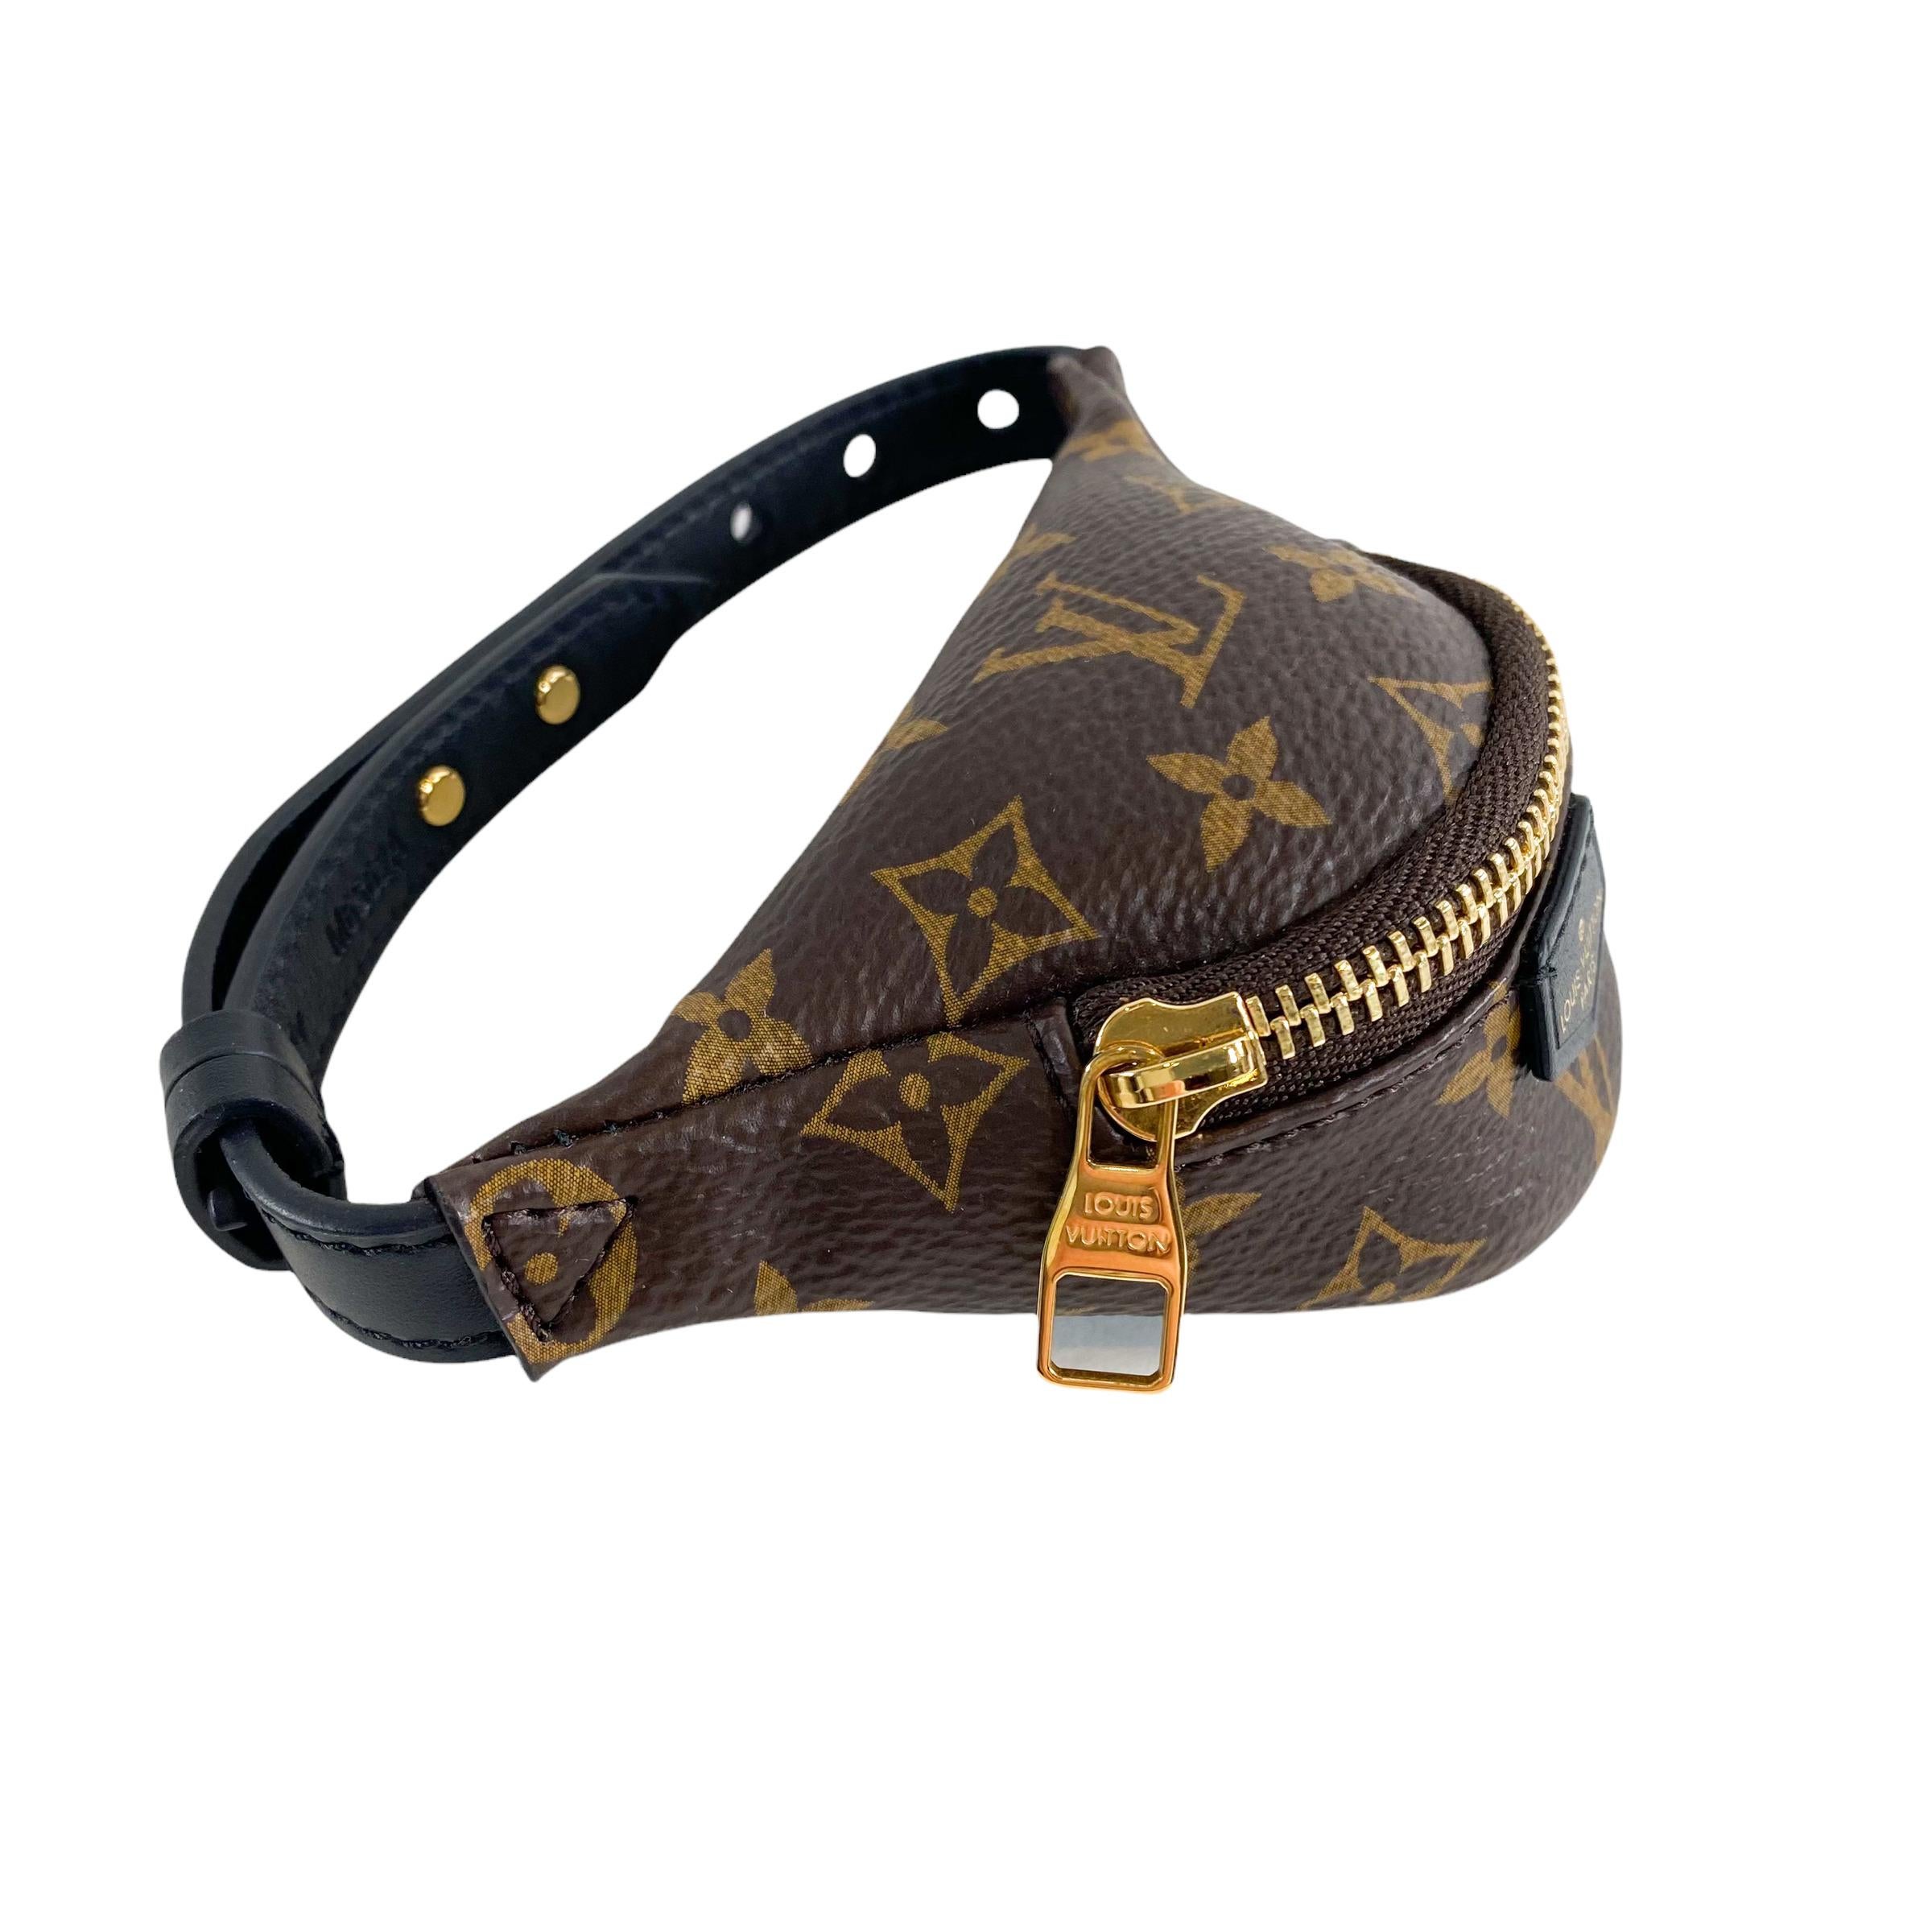 Louis Vuitton Party Bumbag Bracelet

This is an authentic Louis Vuitton Party Bumbag Bracelet. This bracelet features a mini monogram bumbag with a zip closure. 

Additional information:
Included accessories: Dustbag
Condition: Overall excellent